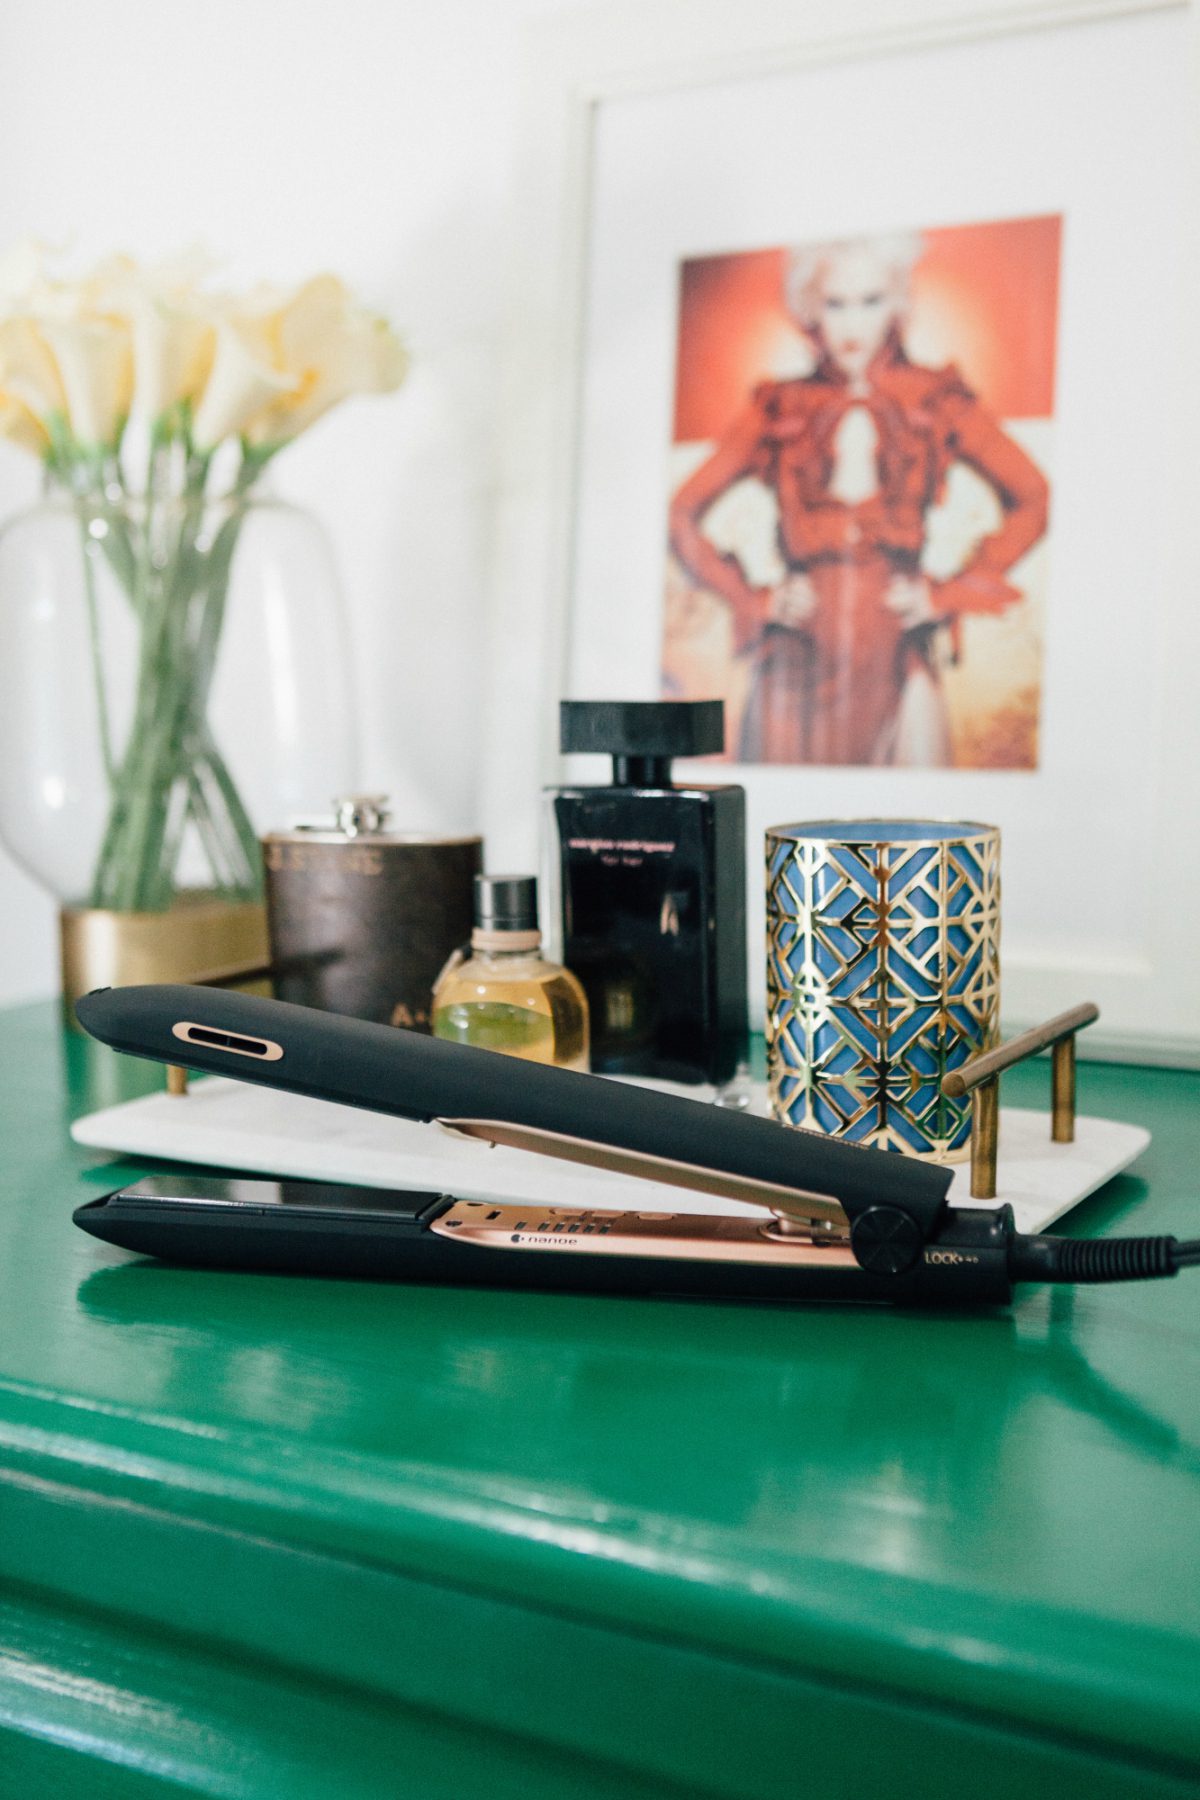 panasonic styling flat iron, perfumes, flowers, and a frame on top of a green surface